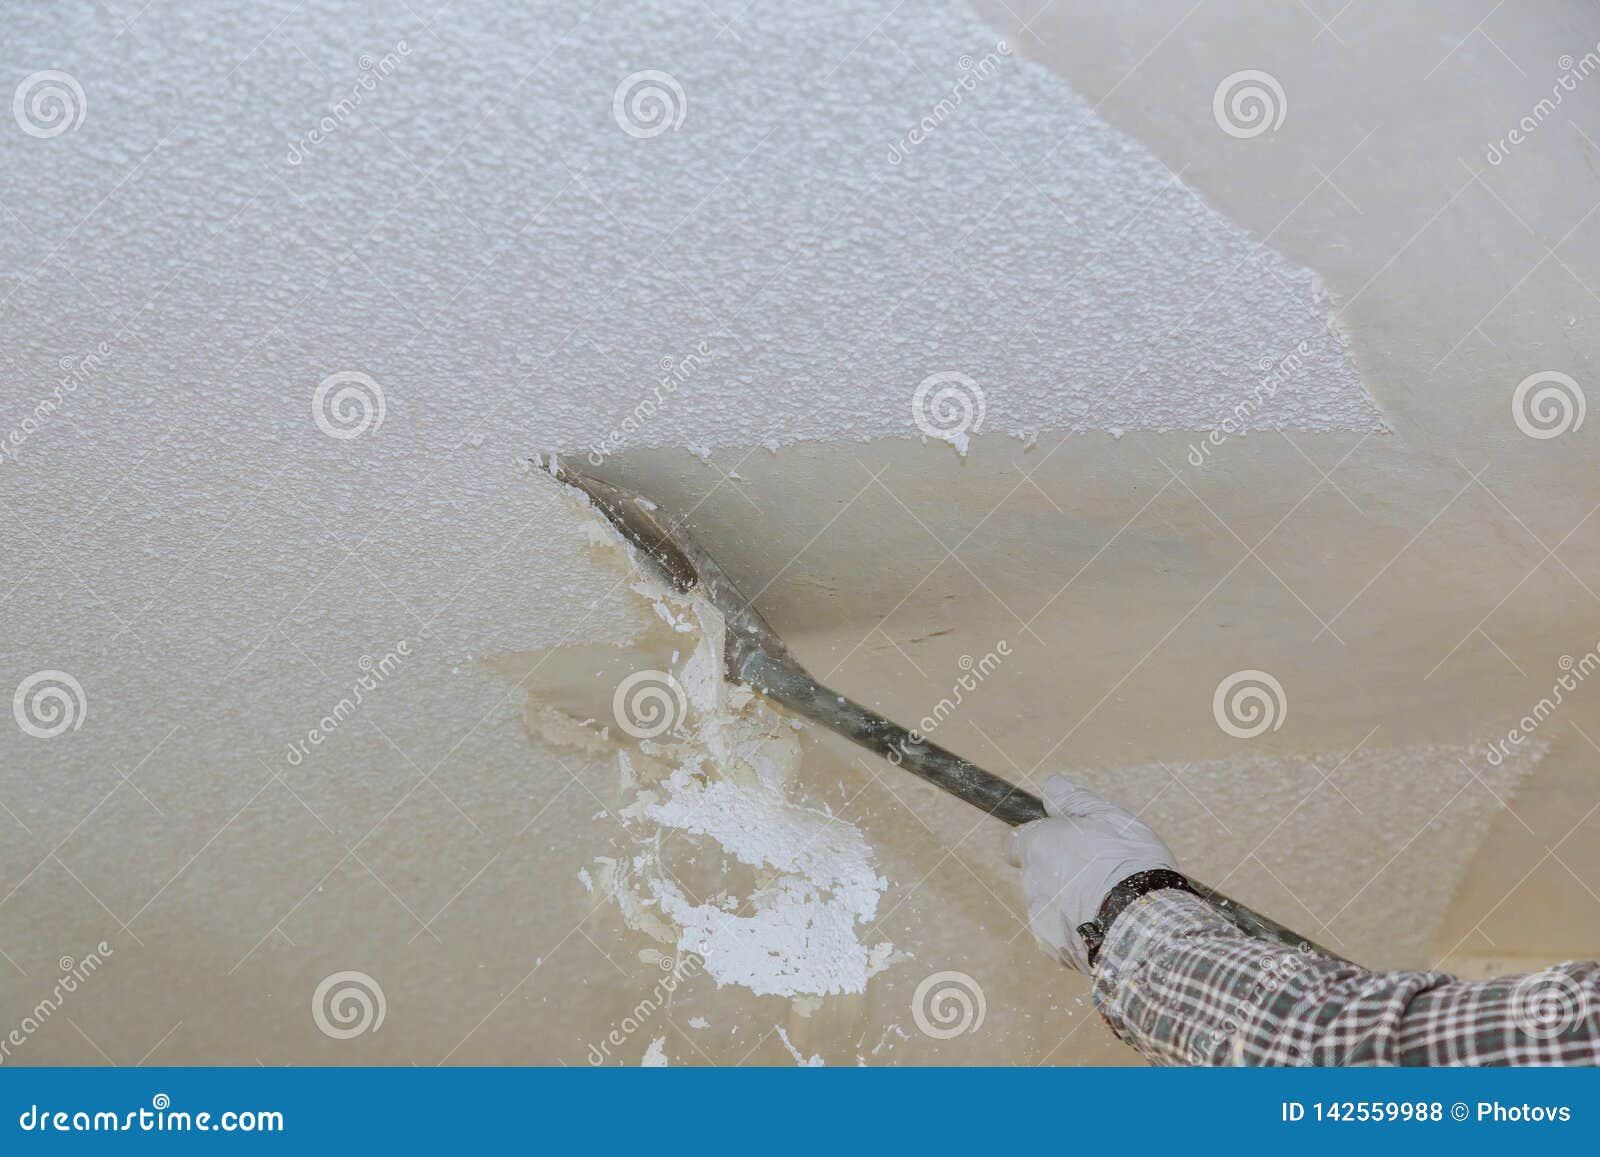 Take Off In The Popcorn Ceiling Home Wall Texture Removal